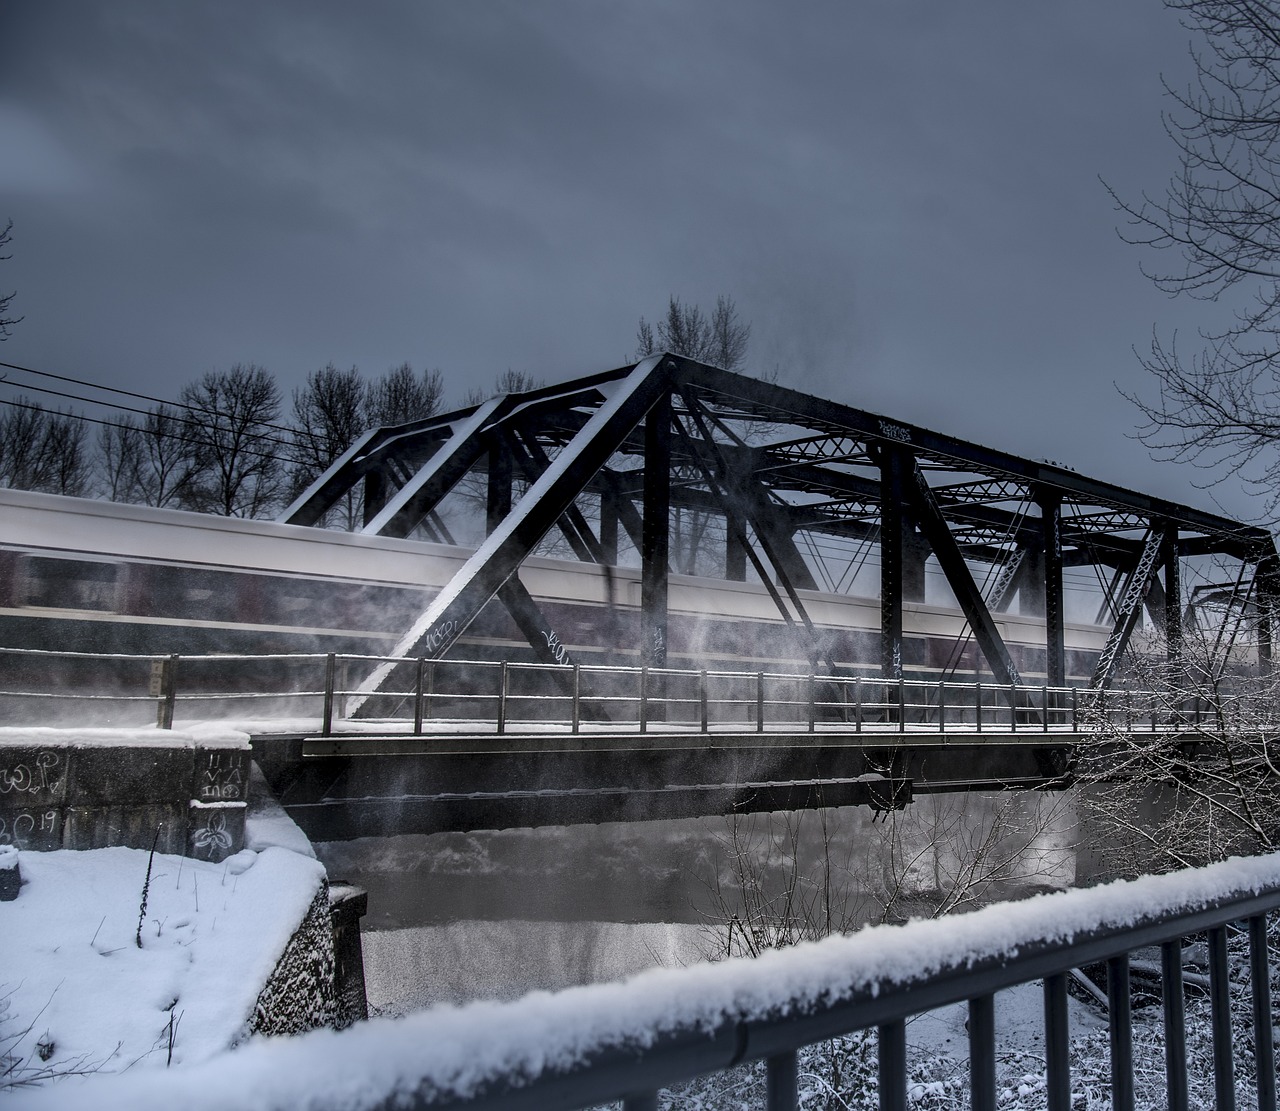 Silver train raises clouds of snow as it goes over railroad trestle in a blur